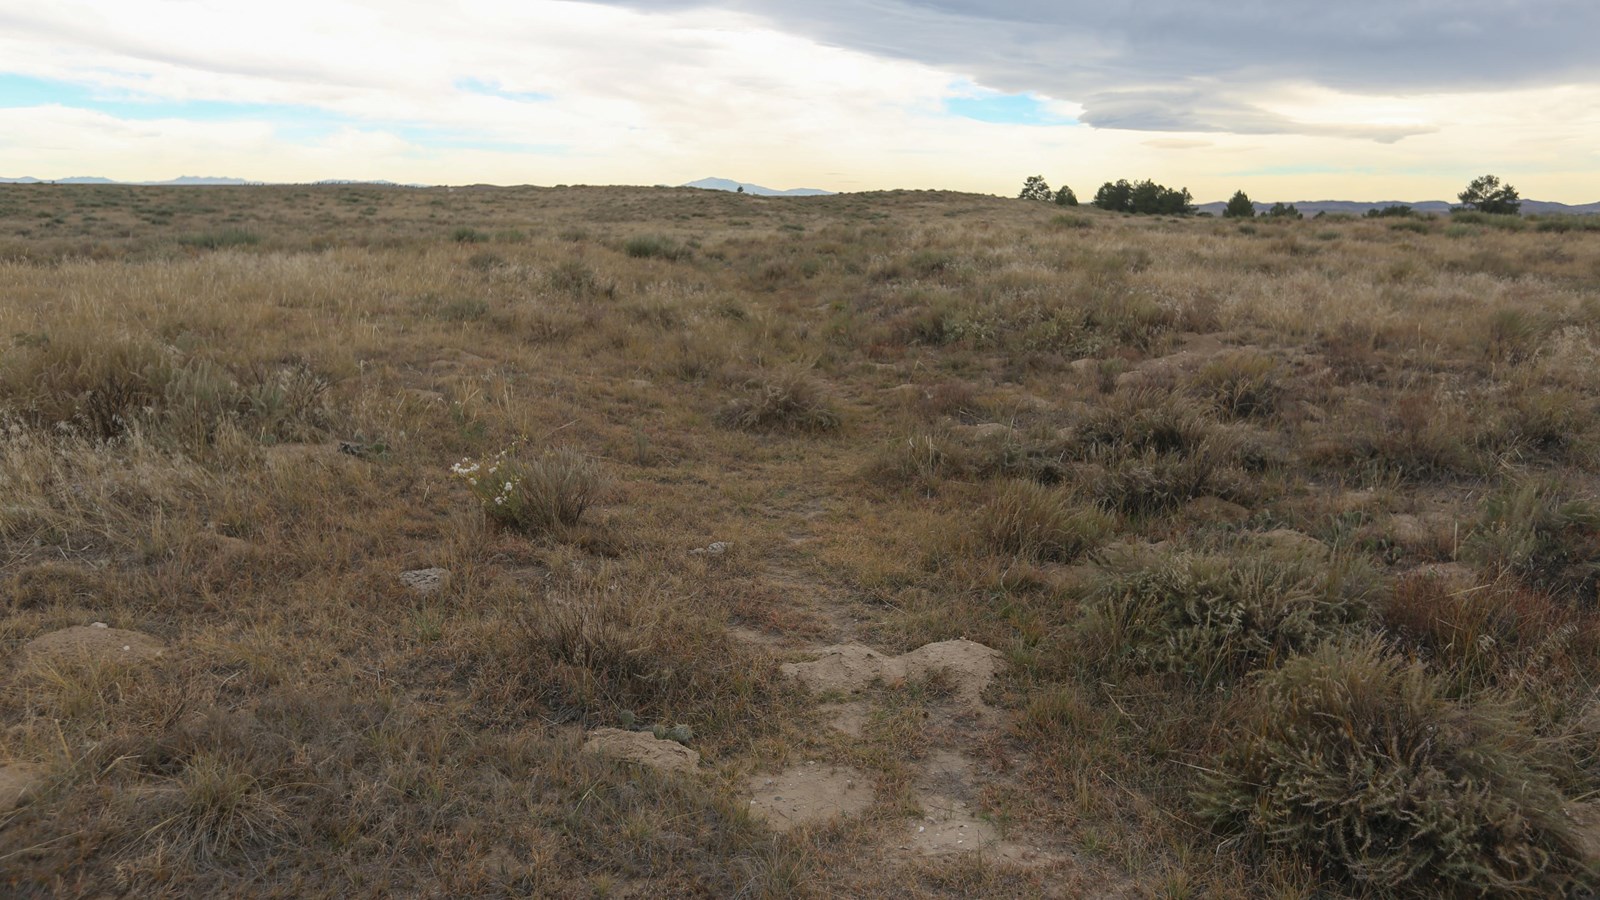 A landscape view of a grassy, flat area with an eroded path through the middle.